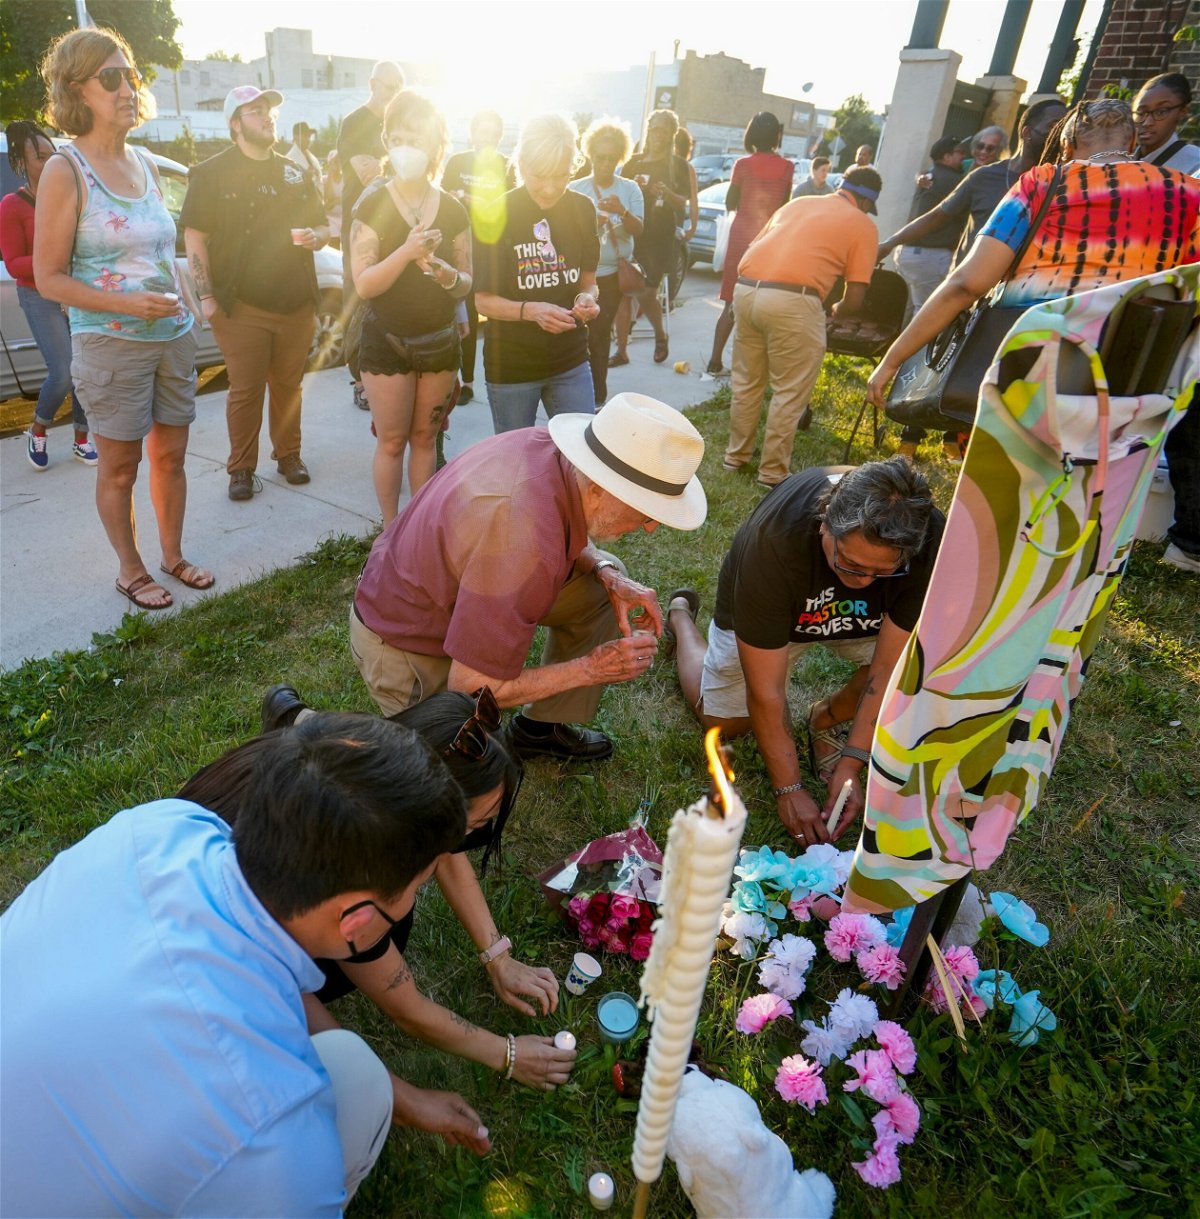 <i>Ebony Cox/Milwaukee Journal Sentinel/USA Today Network</i><br/>Milwaukee officials are urging the public to come forward with any information related to the killing of Brazil Johnson